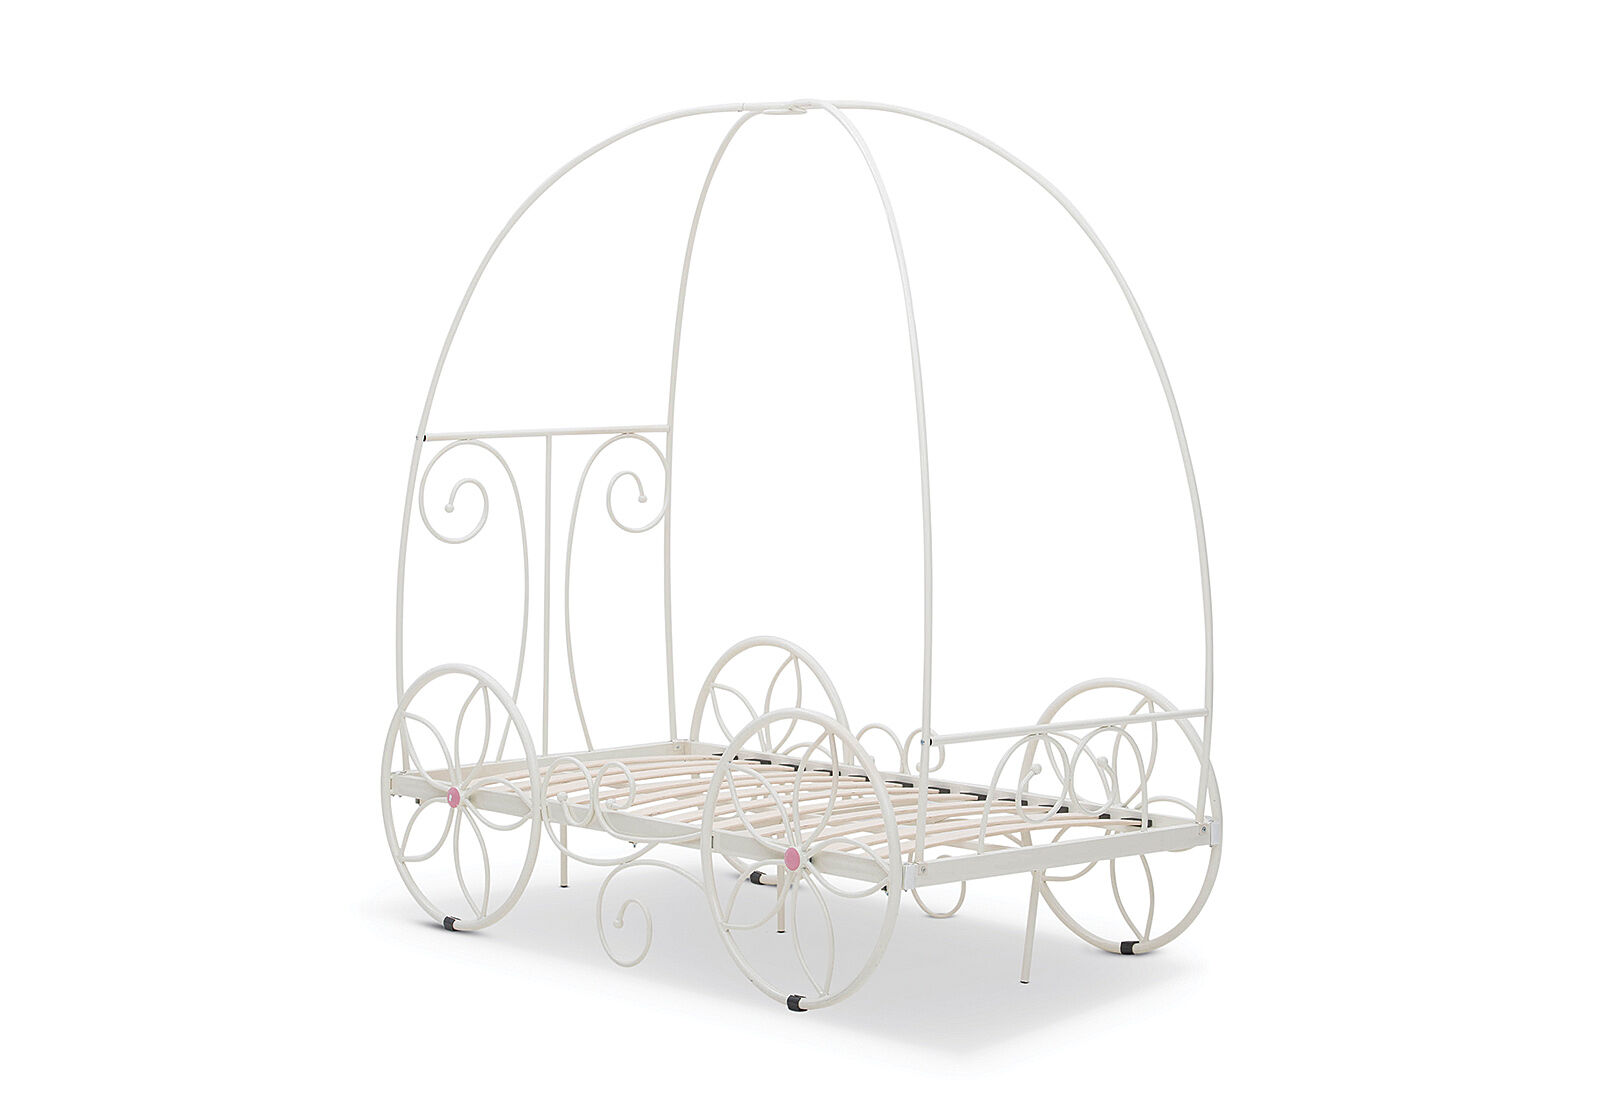 Tije-sp: Carriage Bed Amart